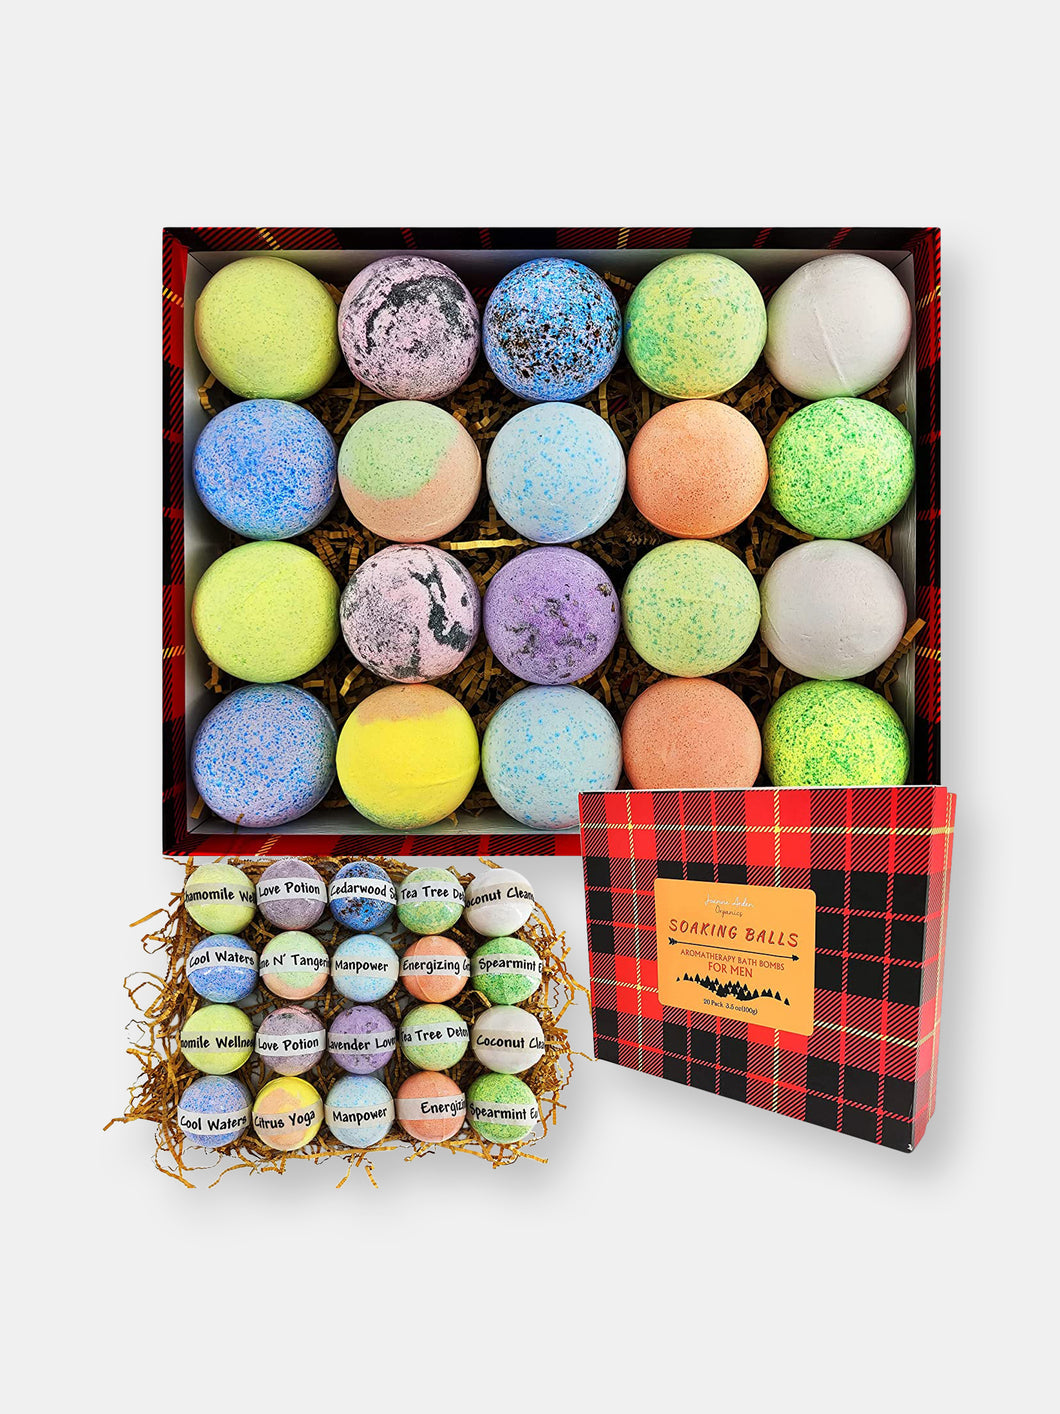 XL 20 Piece Bath Bomb Gift Set for Real Men, Natural